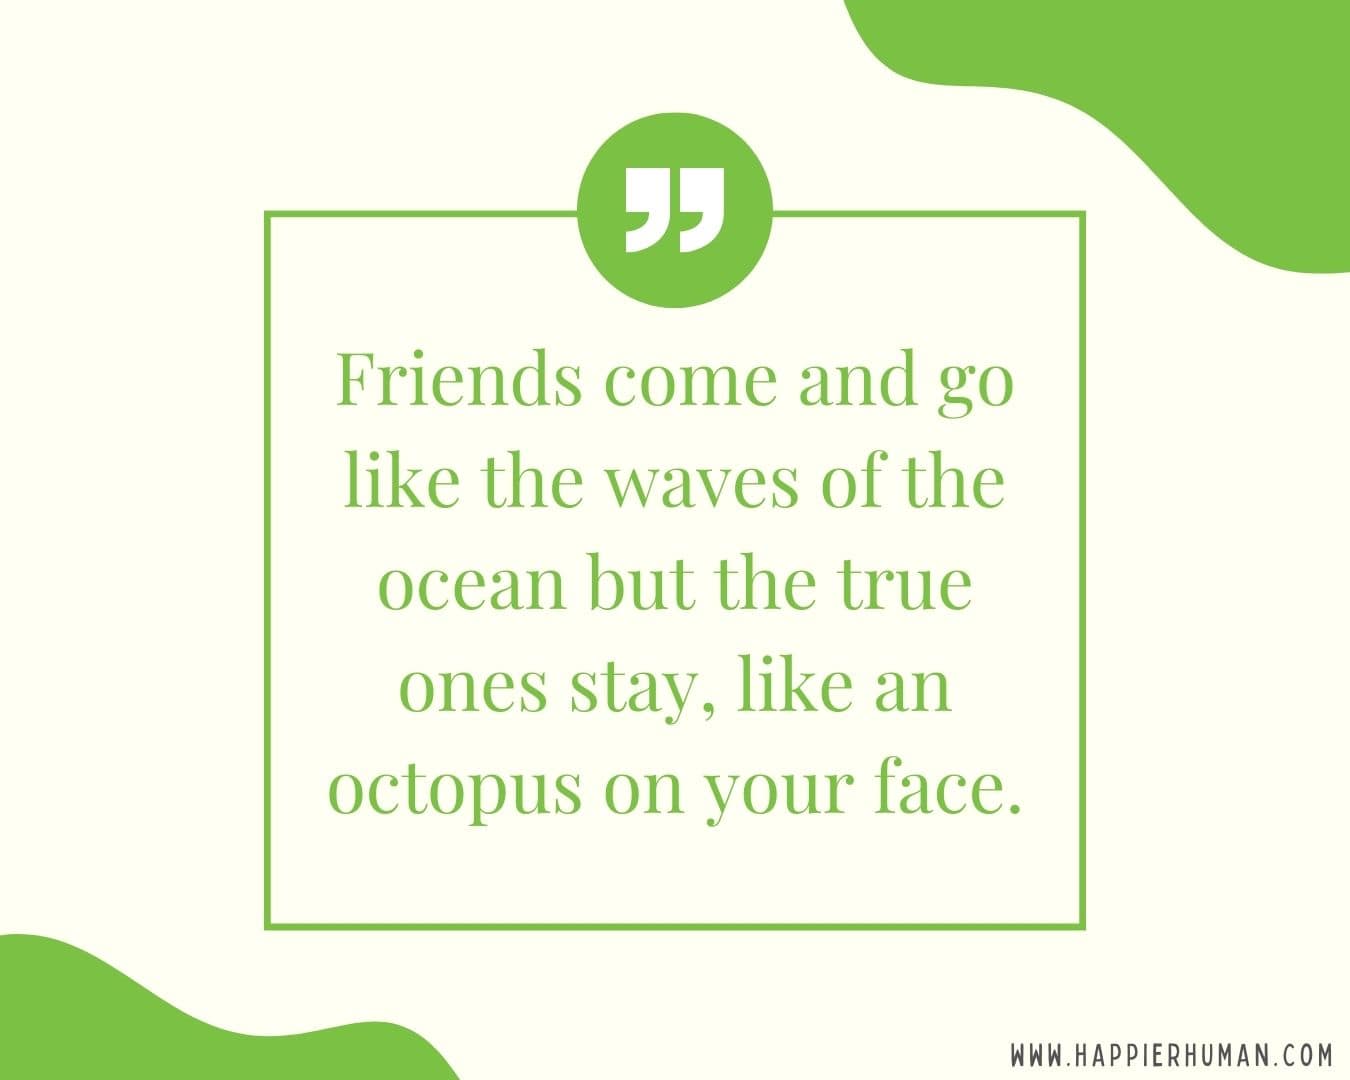 I’m Here for You Quotes - “Friends come and go like the waves of the ocean but the true ones stay, like an octopus on your face.”